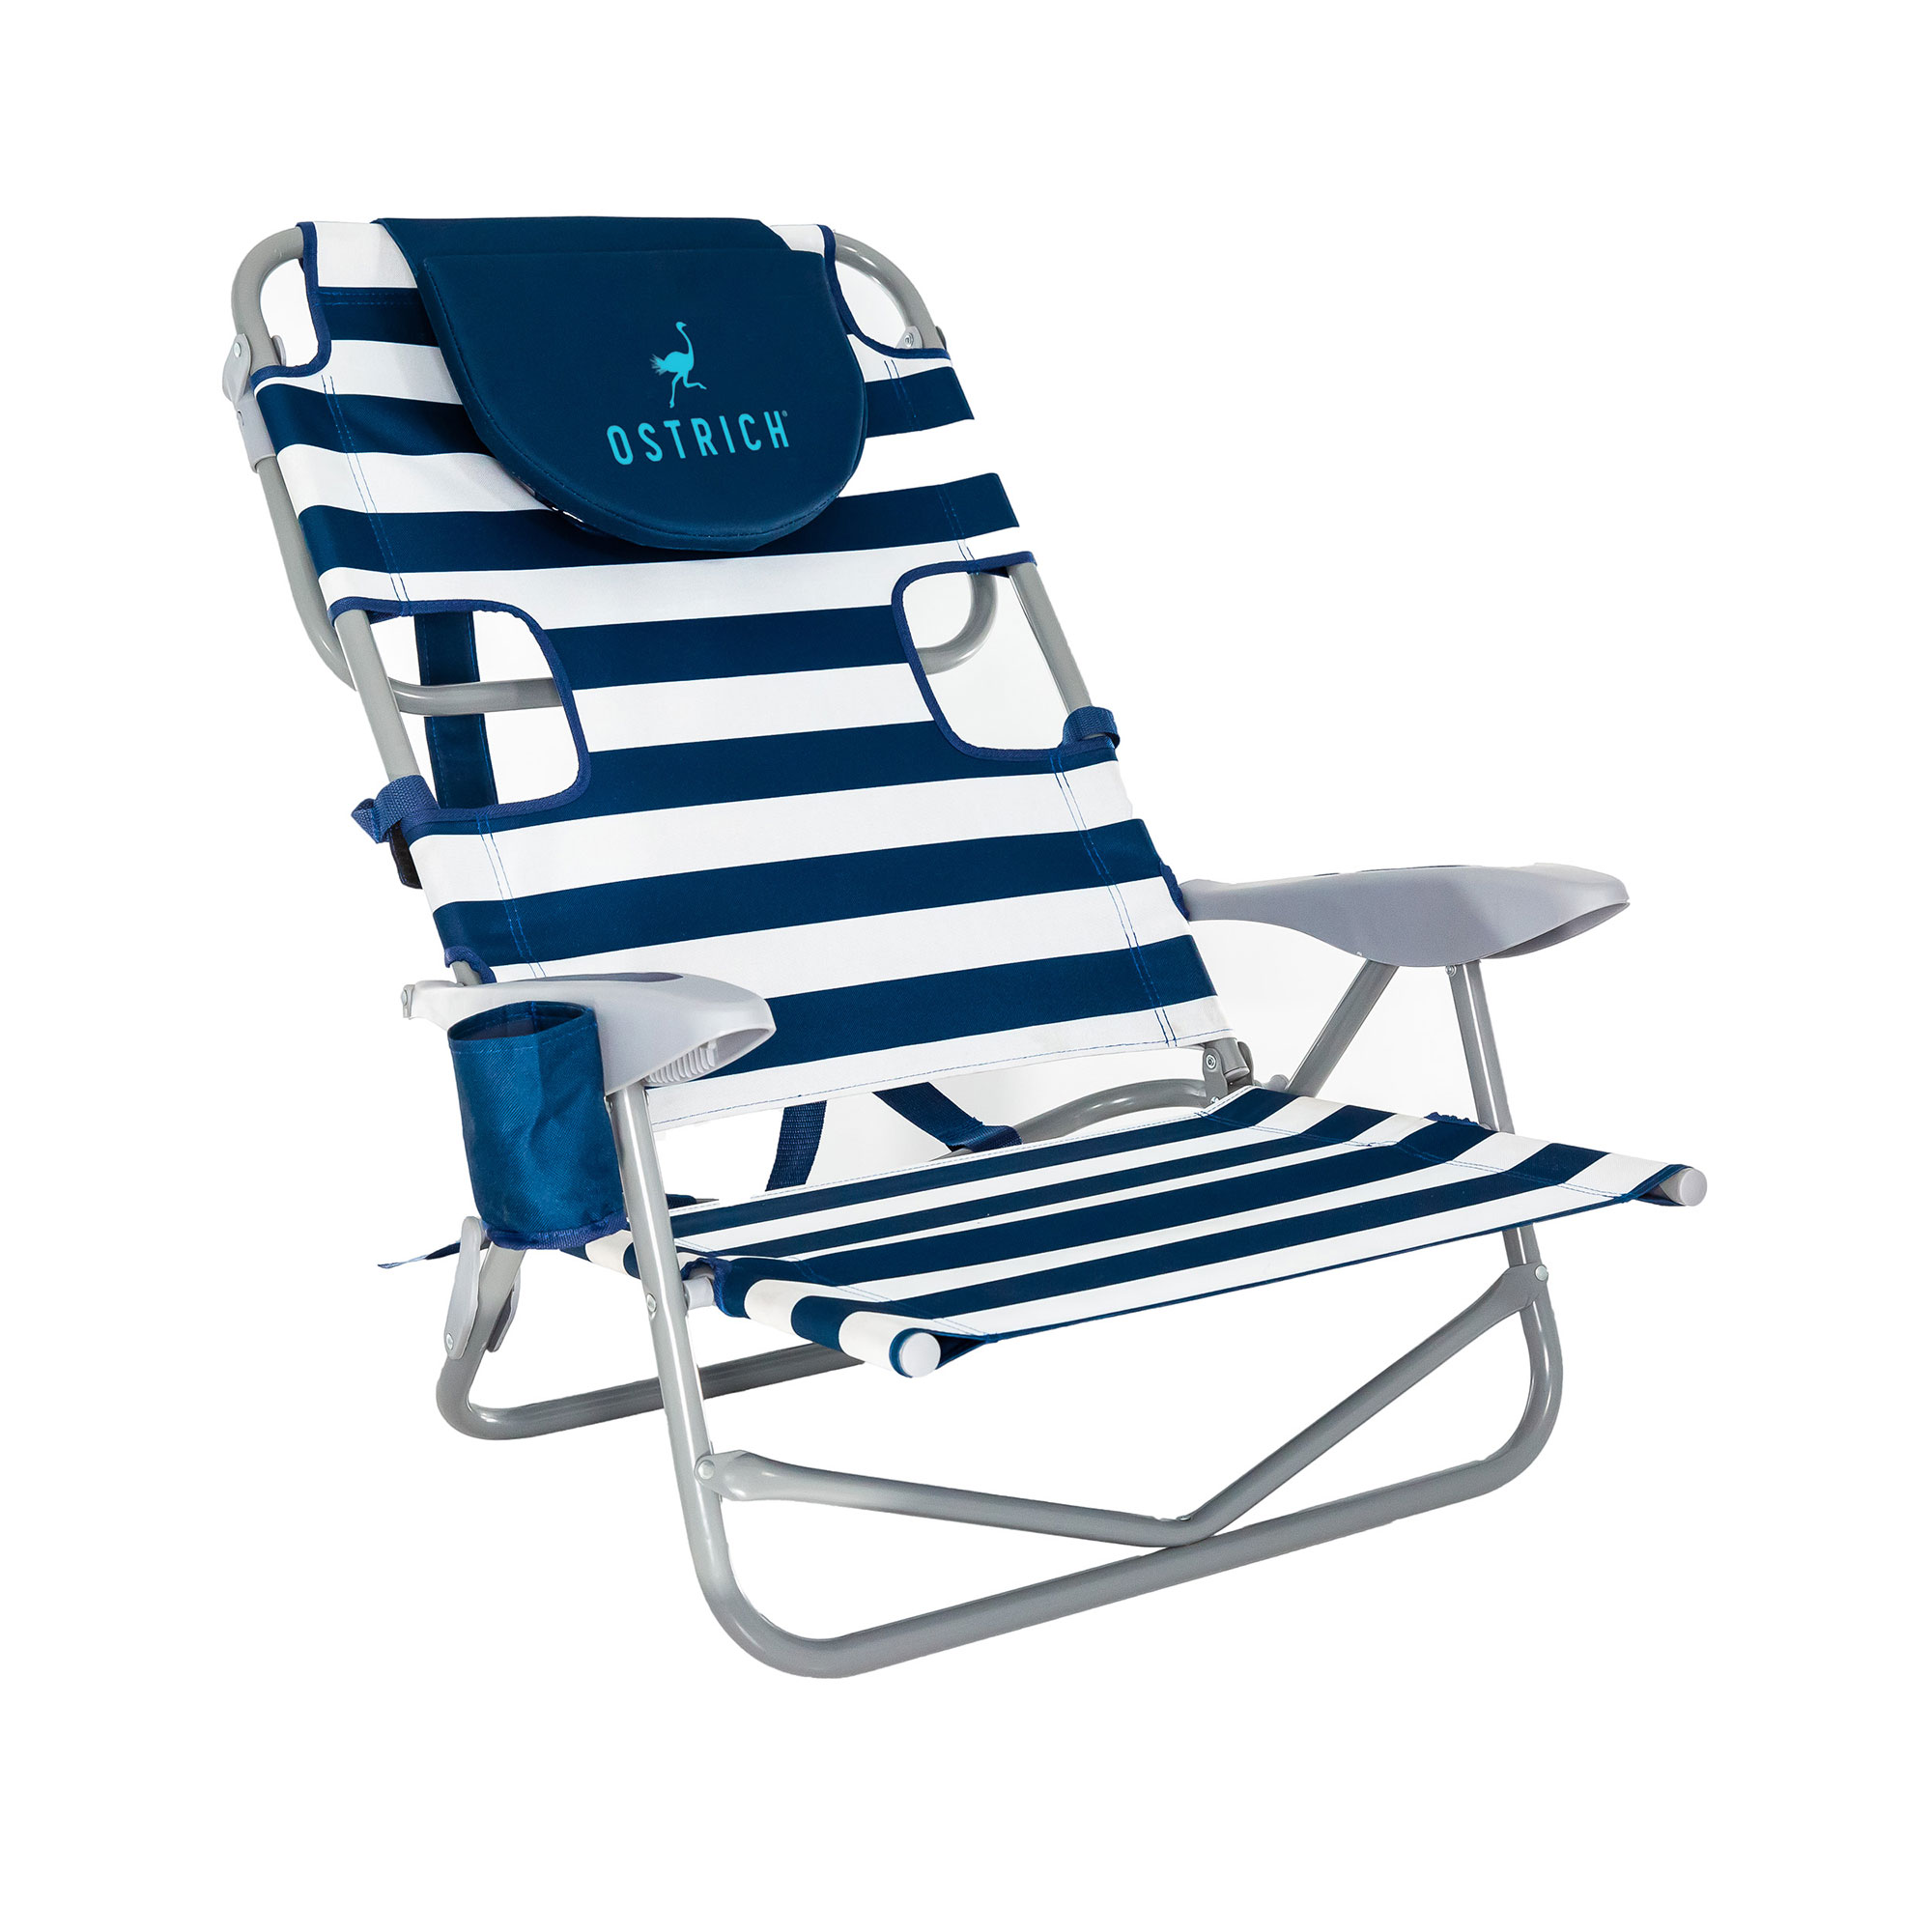 Ostrich On-Your-Back Outdoor Reclining Beach Pool Camping Chair,Blue Stripe - image 1 of 11